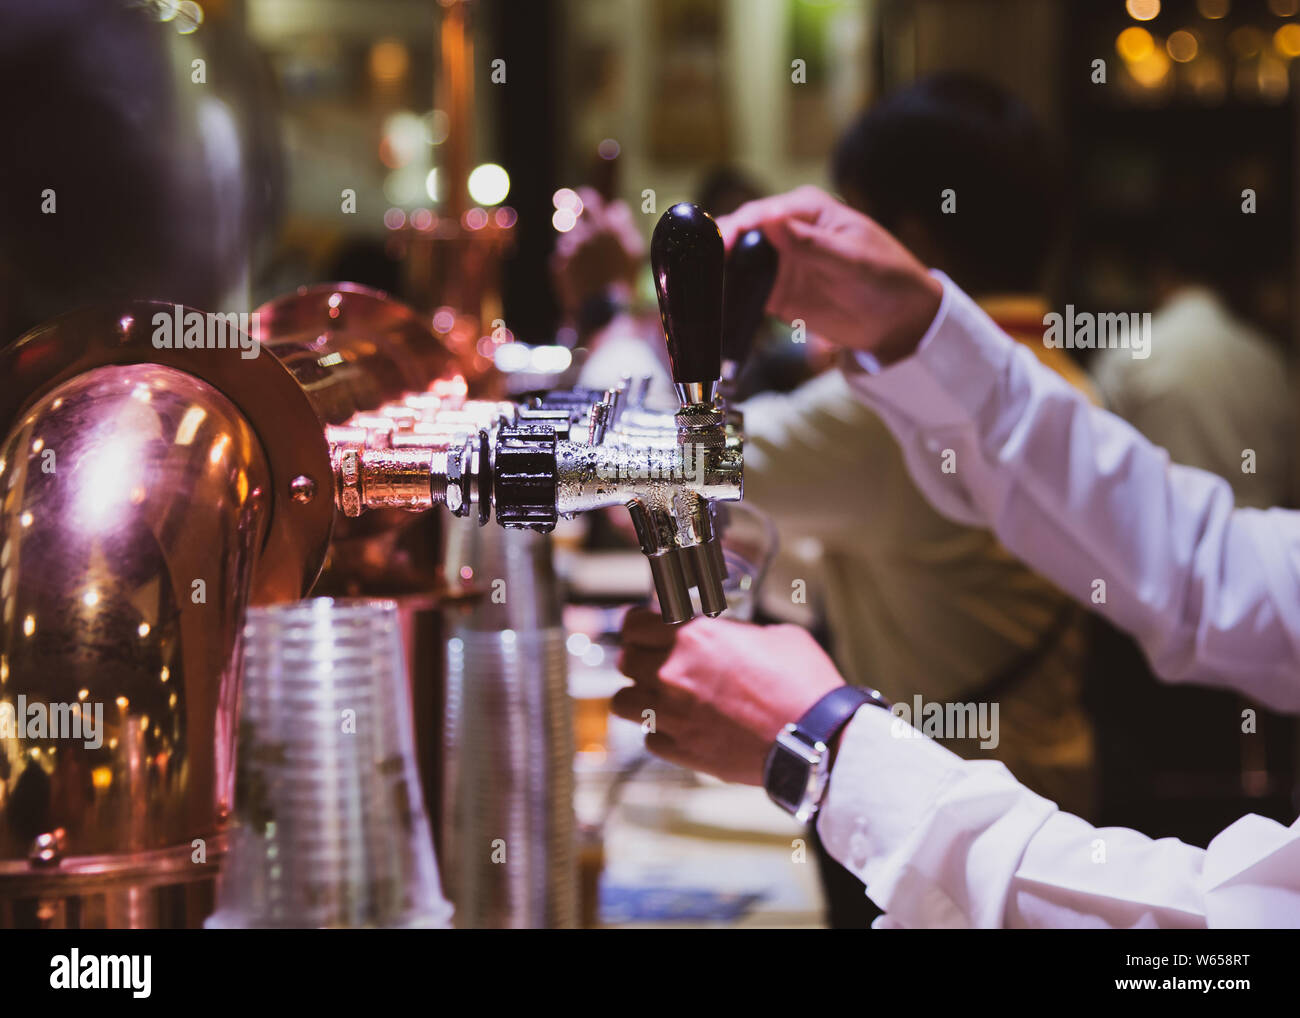 Bartender pouring draft beer in the bar, Barman hand at beer tap pouring draught lager beer serving in a restaurant or pub Stock Photo